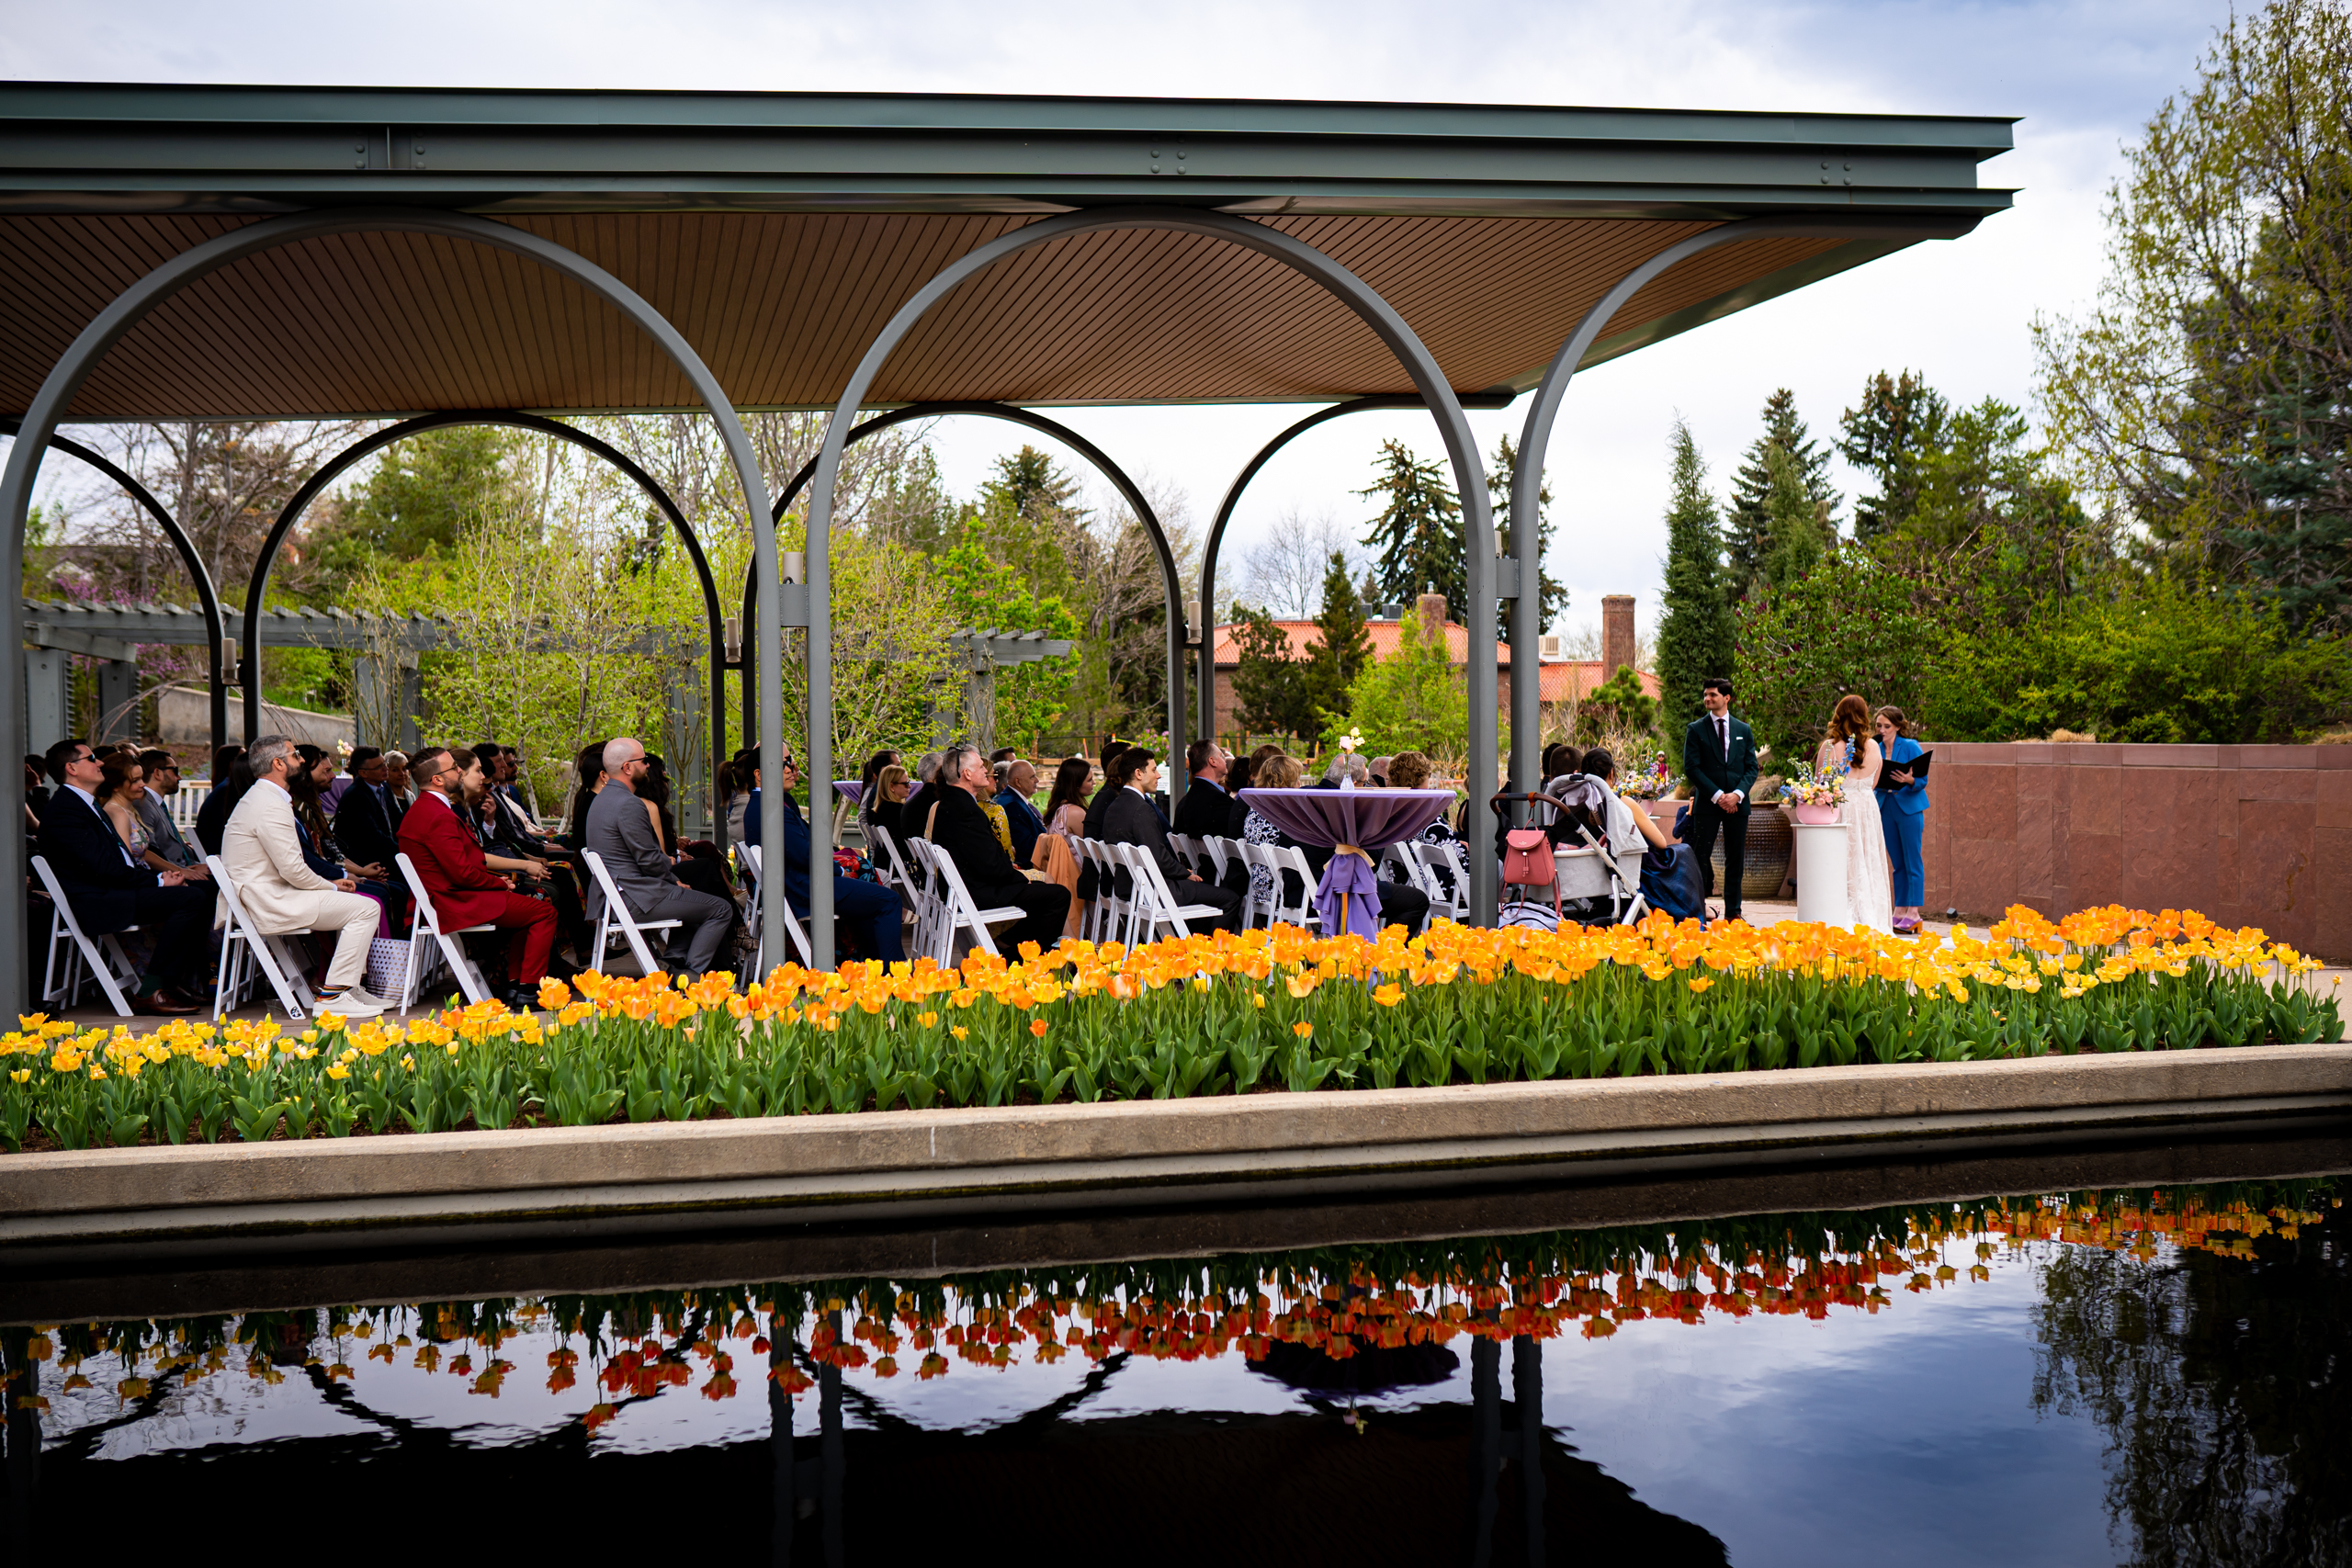 Wide photograph of a wedding ceremony at the Denver Botanic Garden's Annual Garden with the tulips reflected in the pond, wedding photos, wedding photography, wedding photographer, wedding photo inspiration, Denver Botanic Garden wedding, Denver Botanic Garden wedding photos, Denver Botanic Garden wedding photography, Denver Botanic Garden wedding inspiration, Denver wedding venue, Denver wedding photos, Denver wedding photography, Denver wedding photographer, Colorado wedding photography